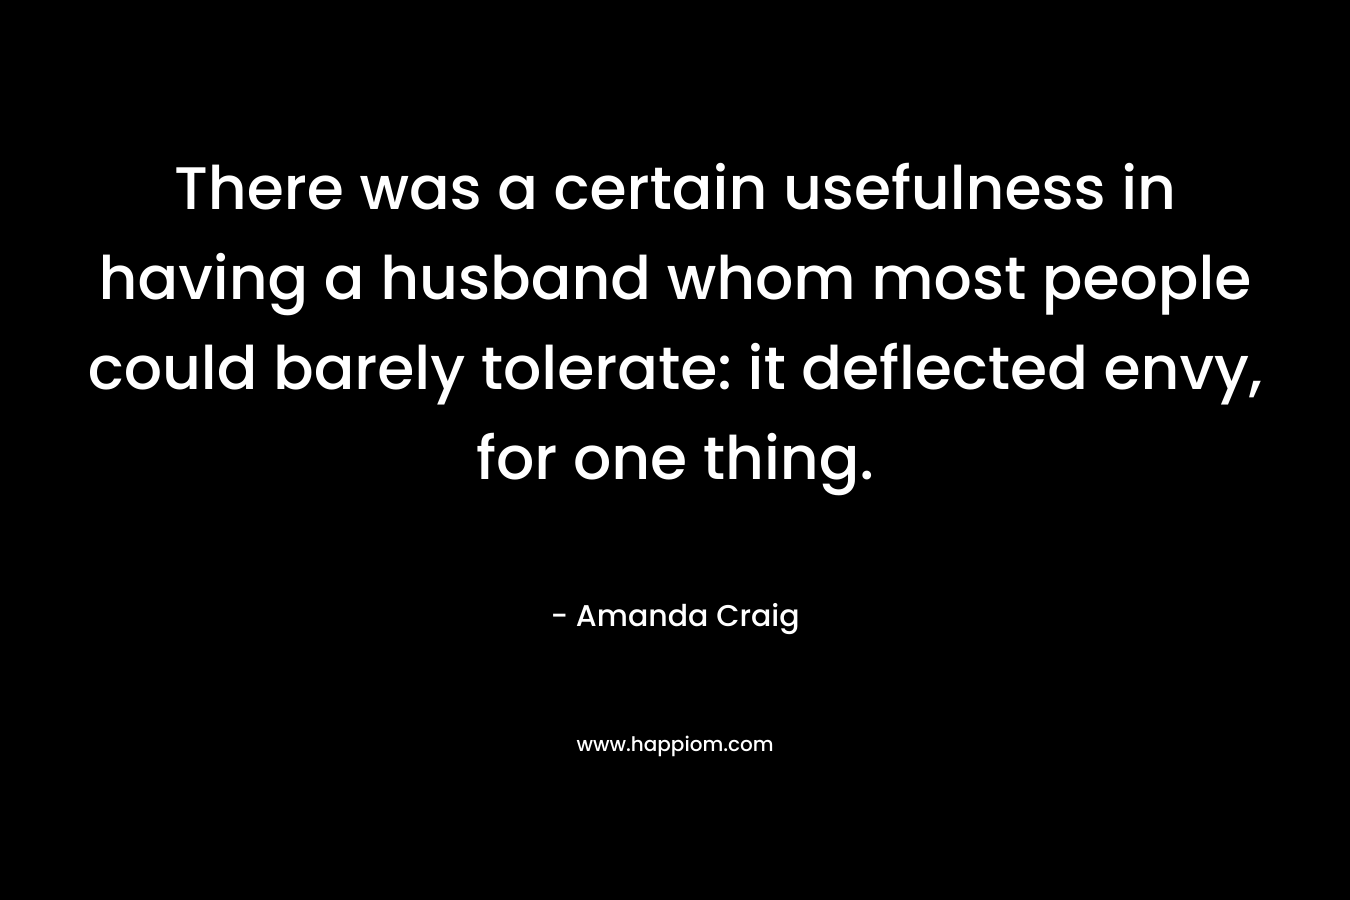 There was a certain usefulness in having a husband whom most people could barely tolerate: it deflected envy, for one thing. – Amanda Craig